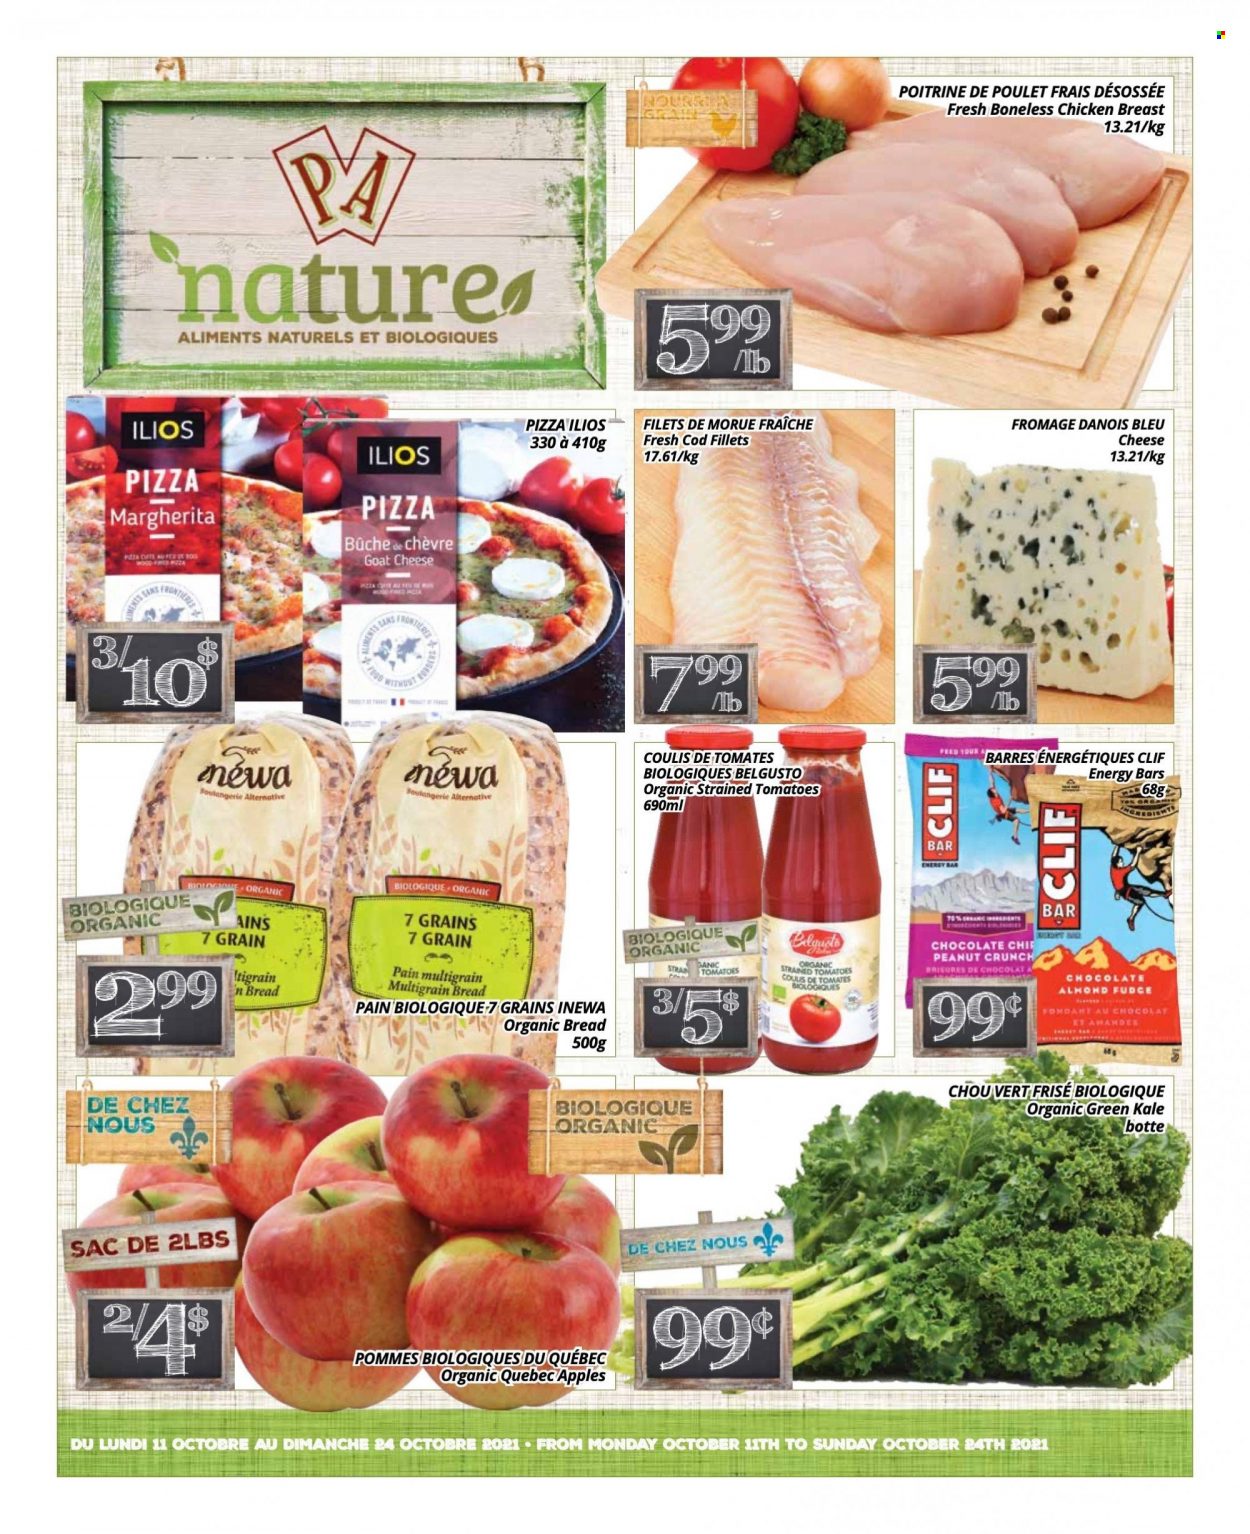 thumbnail - PA Nature Flyer - October 11, 2021 - October 24, 2021 - Sales products - bread, multigrain bread, kale, apples, cod, pizza, chocolate, energy bar, chicken breasts, chicken. Page 1.